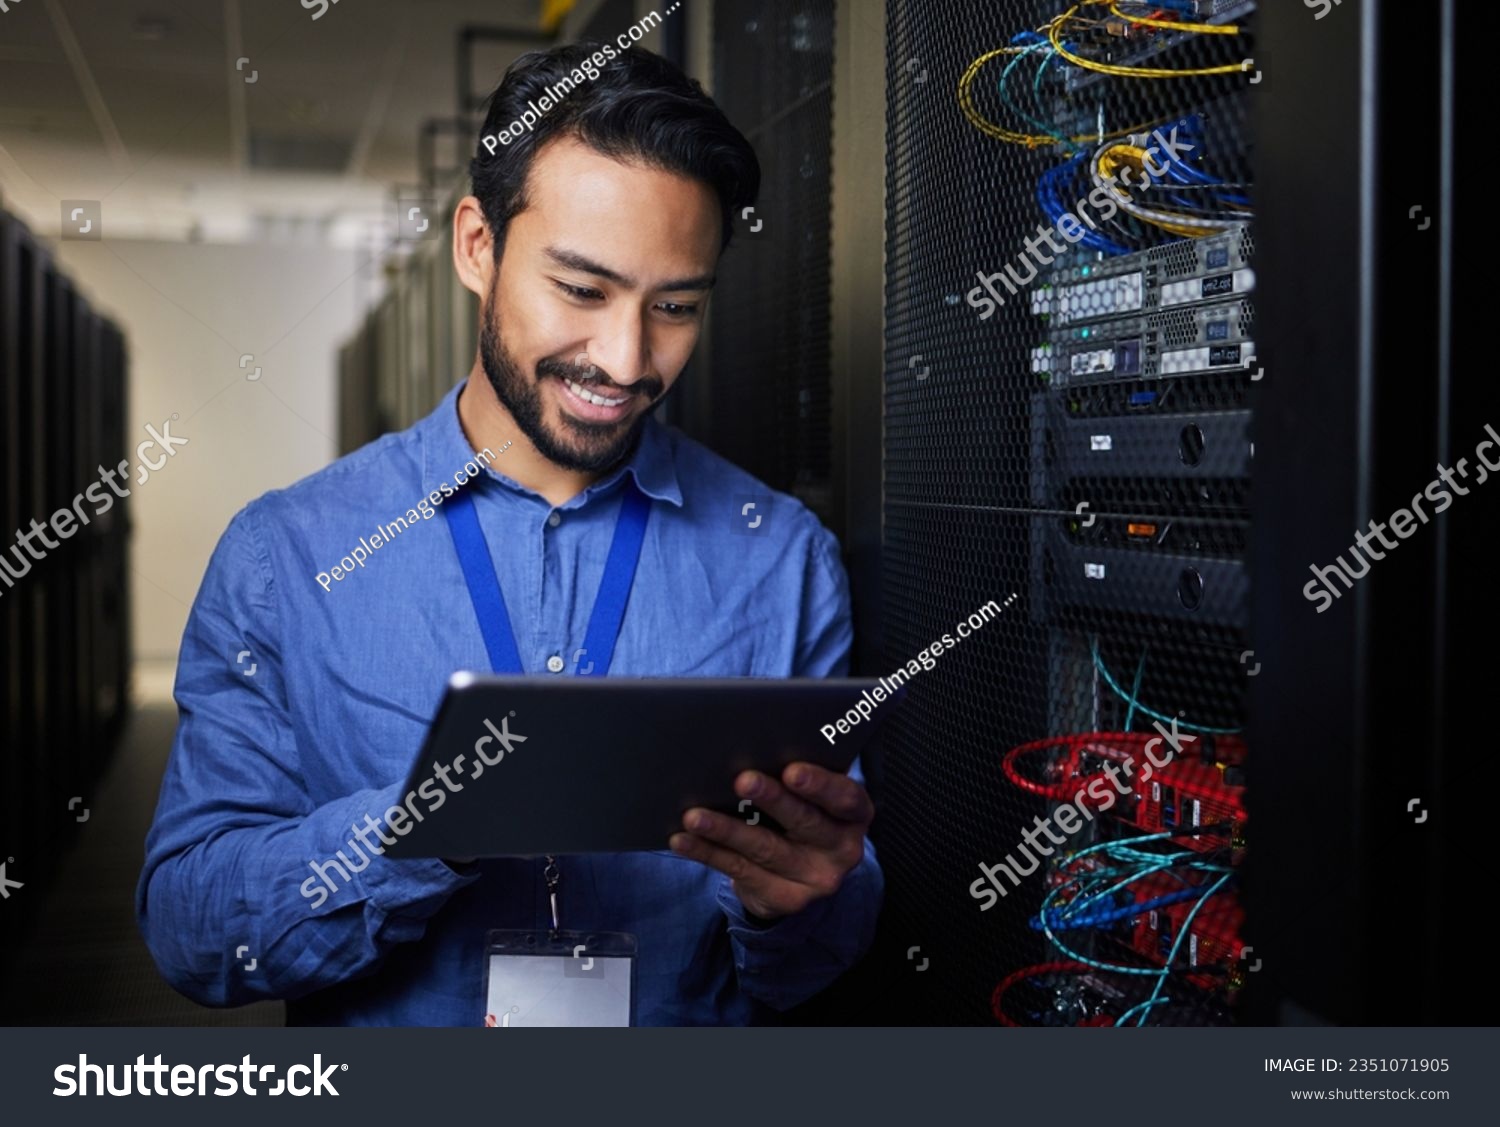 Man, tablet and server room, programming or coding for cybersecurity, information technology and data protection backup. Happy engineering person on digital software and hardware solution in basement #2351071905